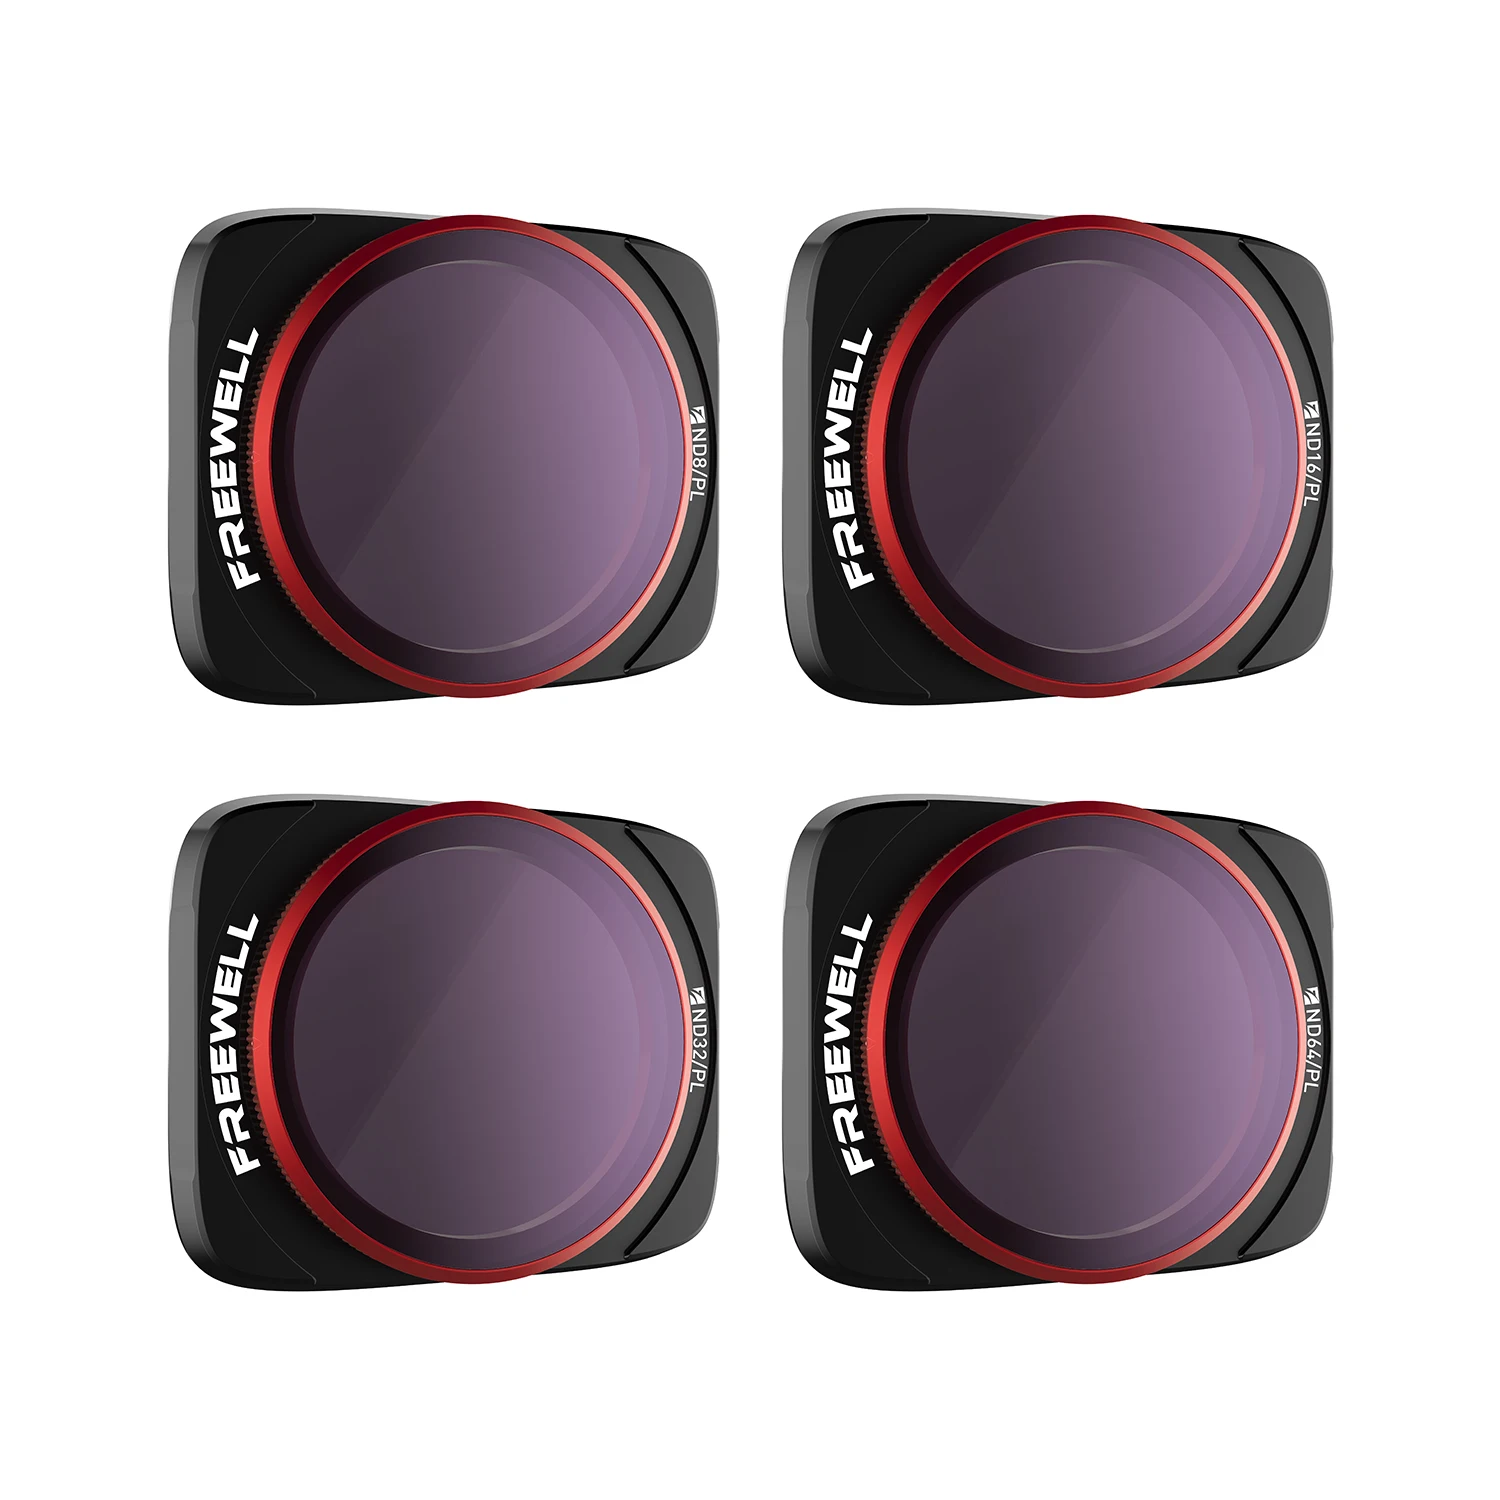 DJI Osmo Pocket 3 Filters Bright Day 4Pack